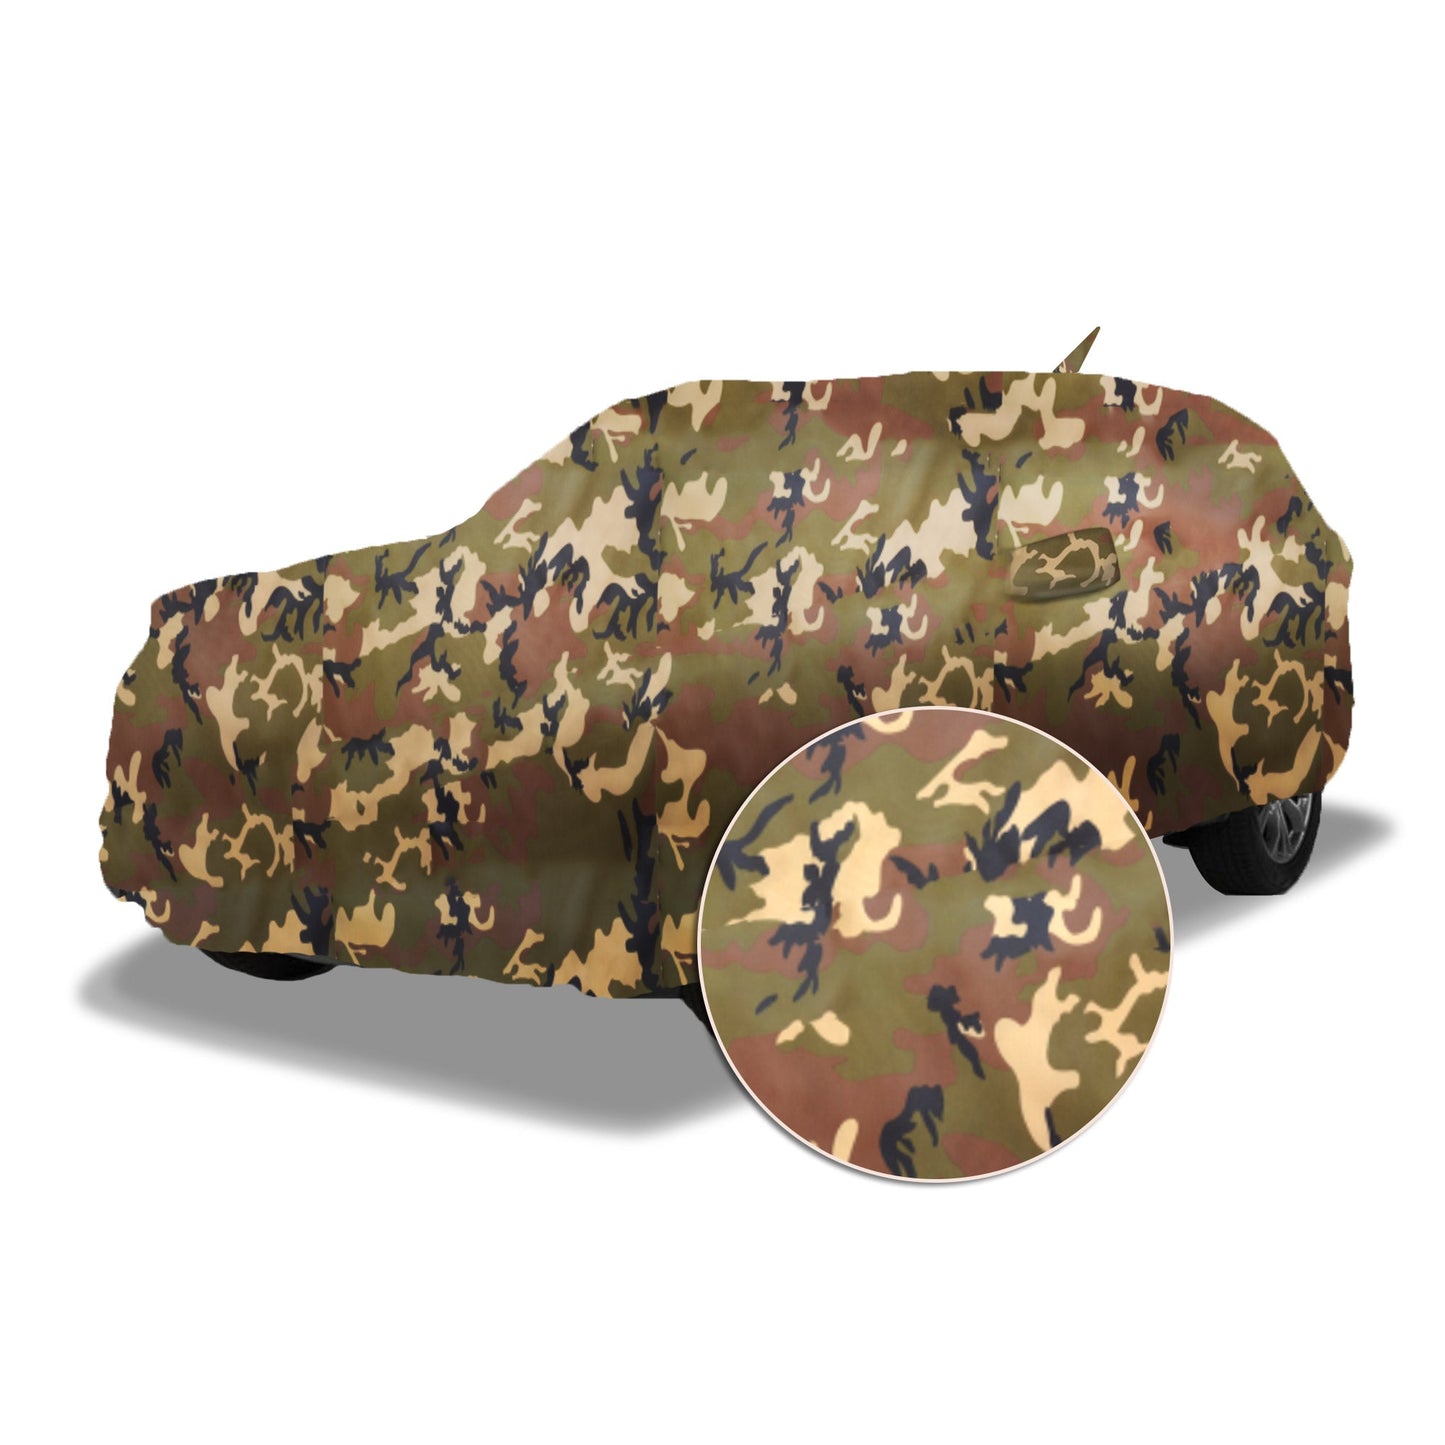 Ascot Mahindra Thar 2010-2020 Model Car Body Cover Extra Strong & Dust Proof Jungle Military Car Cover with UV Proof & Water-Resistant Coating